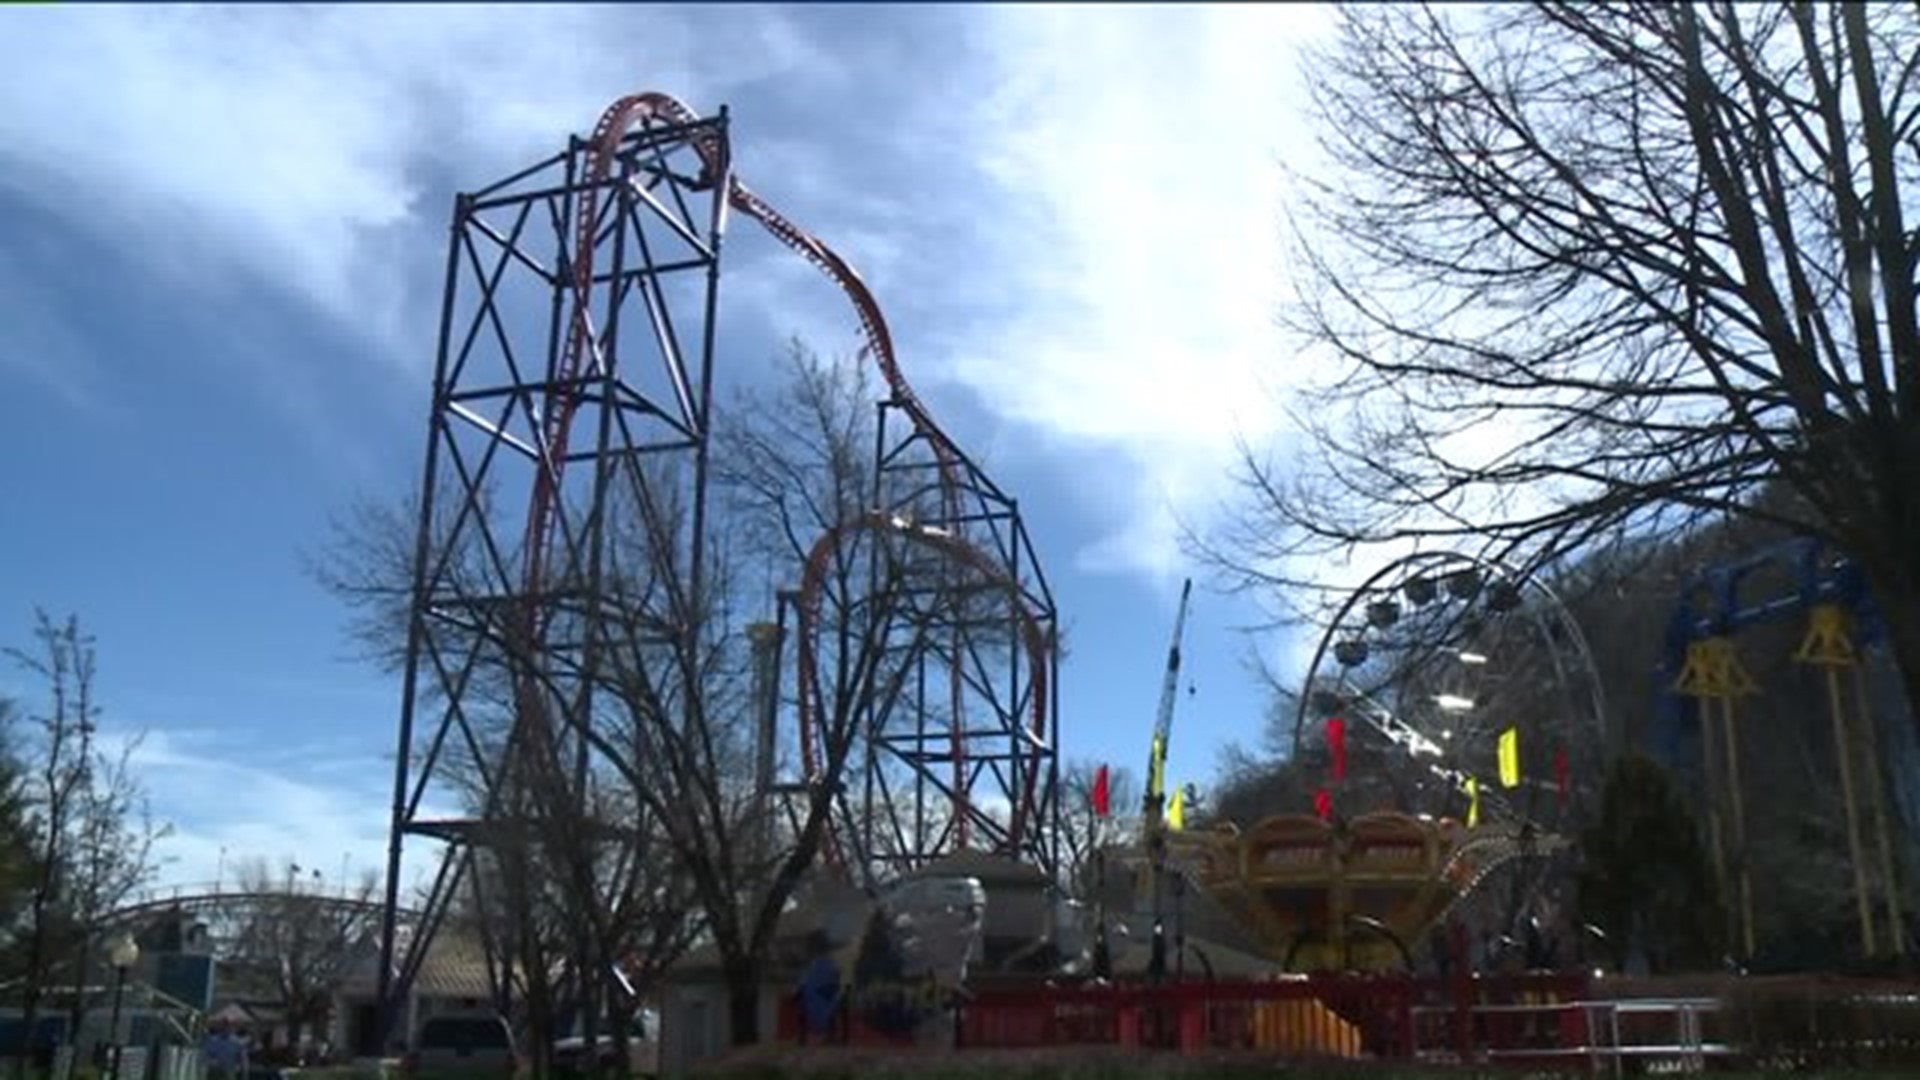 Massive new roller coaster to open at Lake Compounce